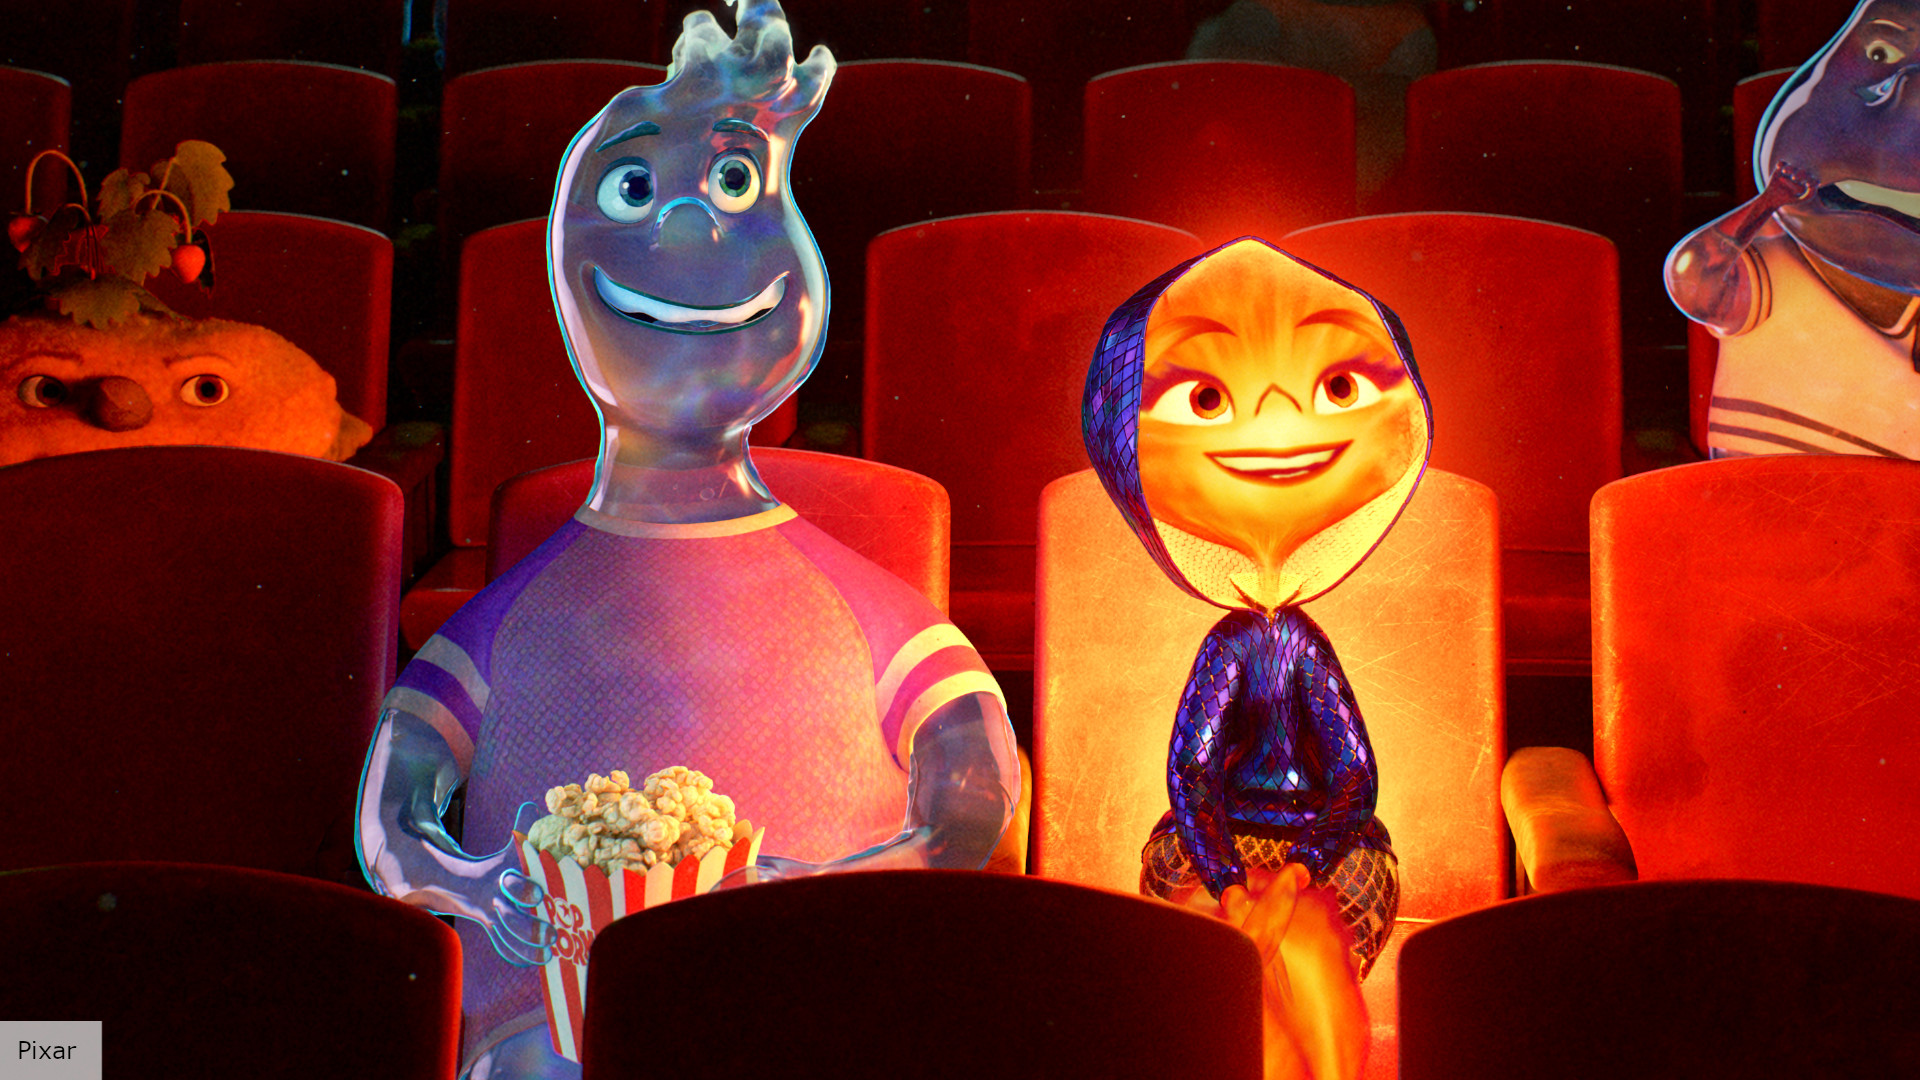 Is Elemental streaming? How to watch the new Pixar movie